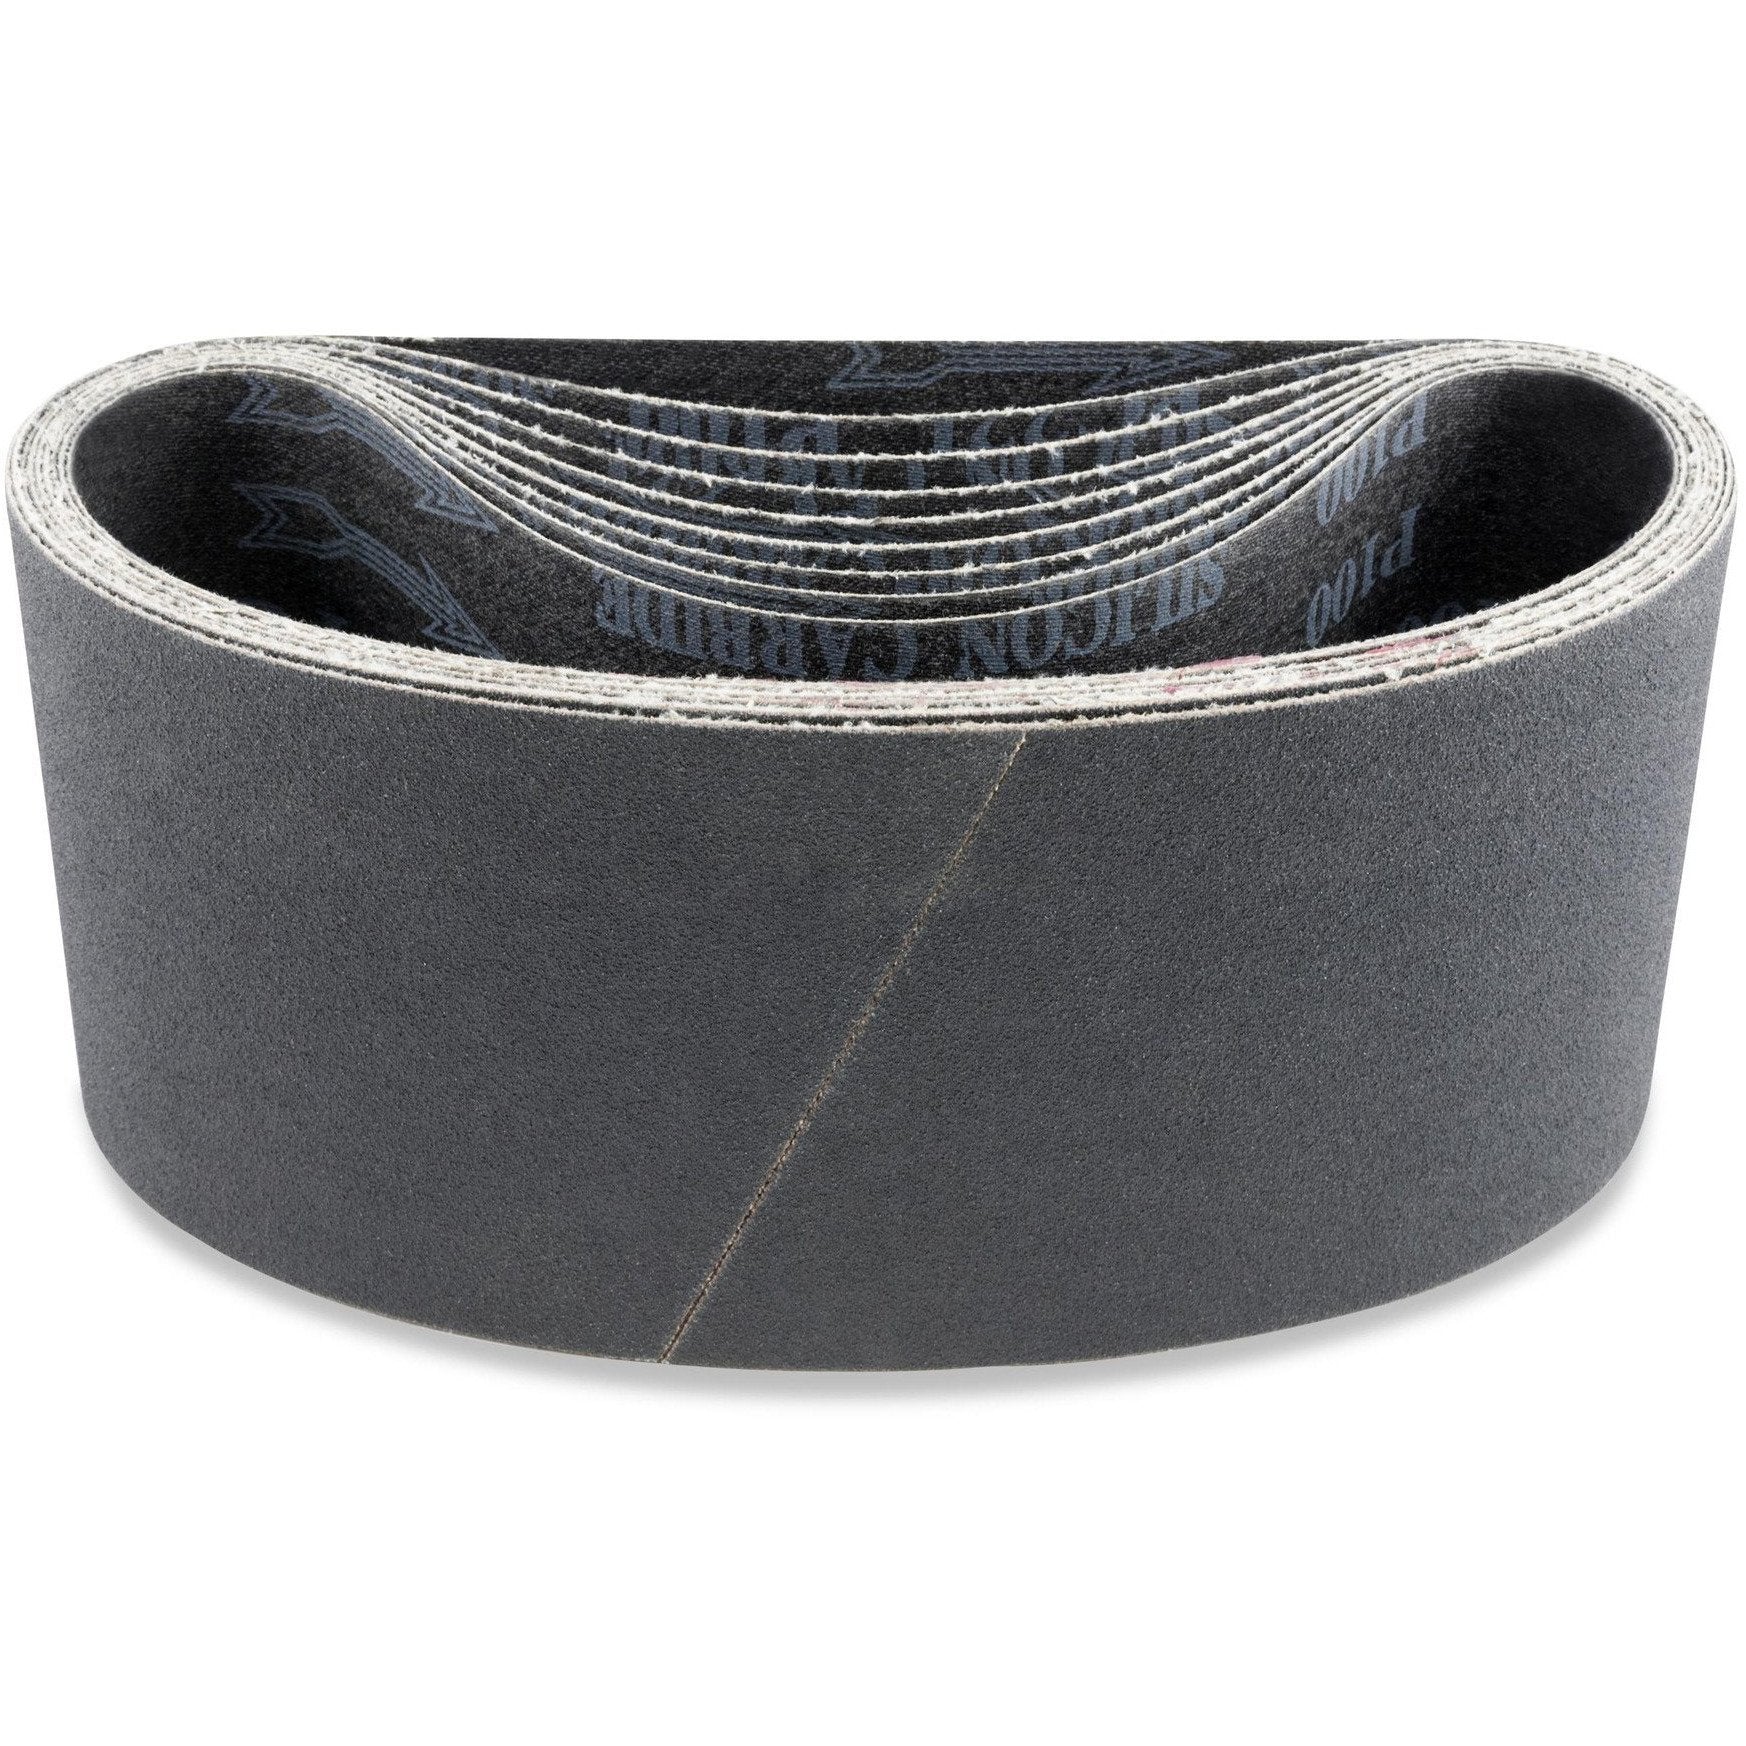 2 1/2 X 14 Inch Industrial Grade Silicon Carbide Sanding Belts, 6 Pack - Red Label Abrasives